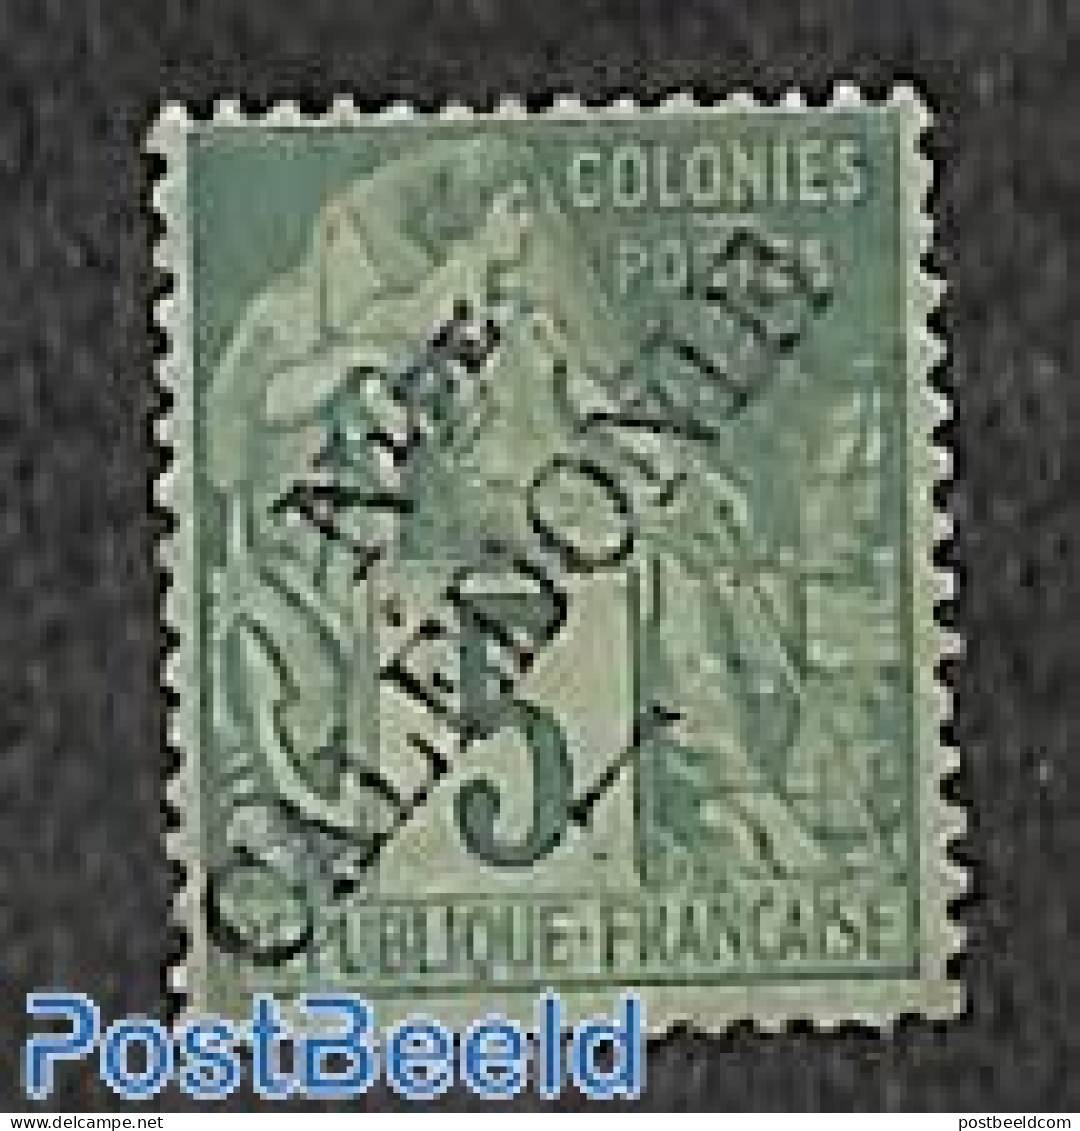 New Caledonia 1892 5c, Stamp Out Of Set, Unused (hinged) - Ungebraucht